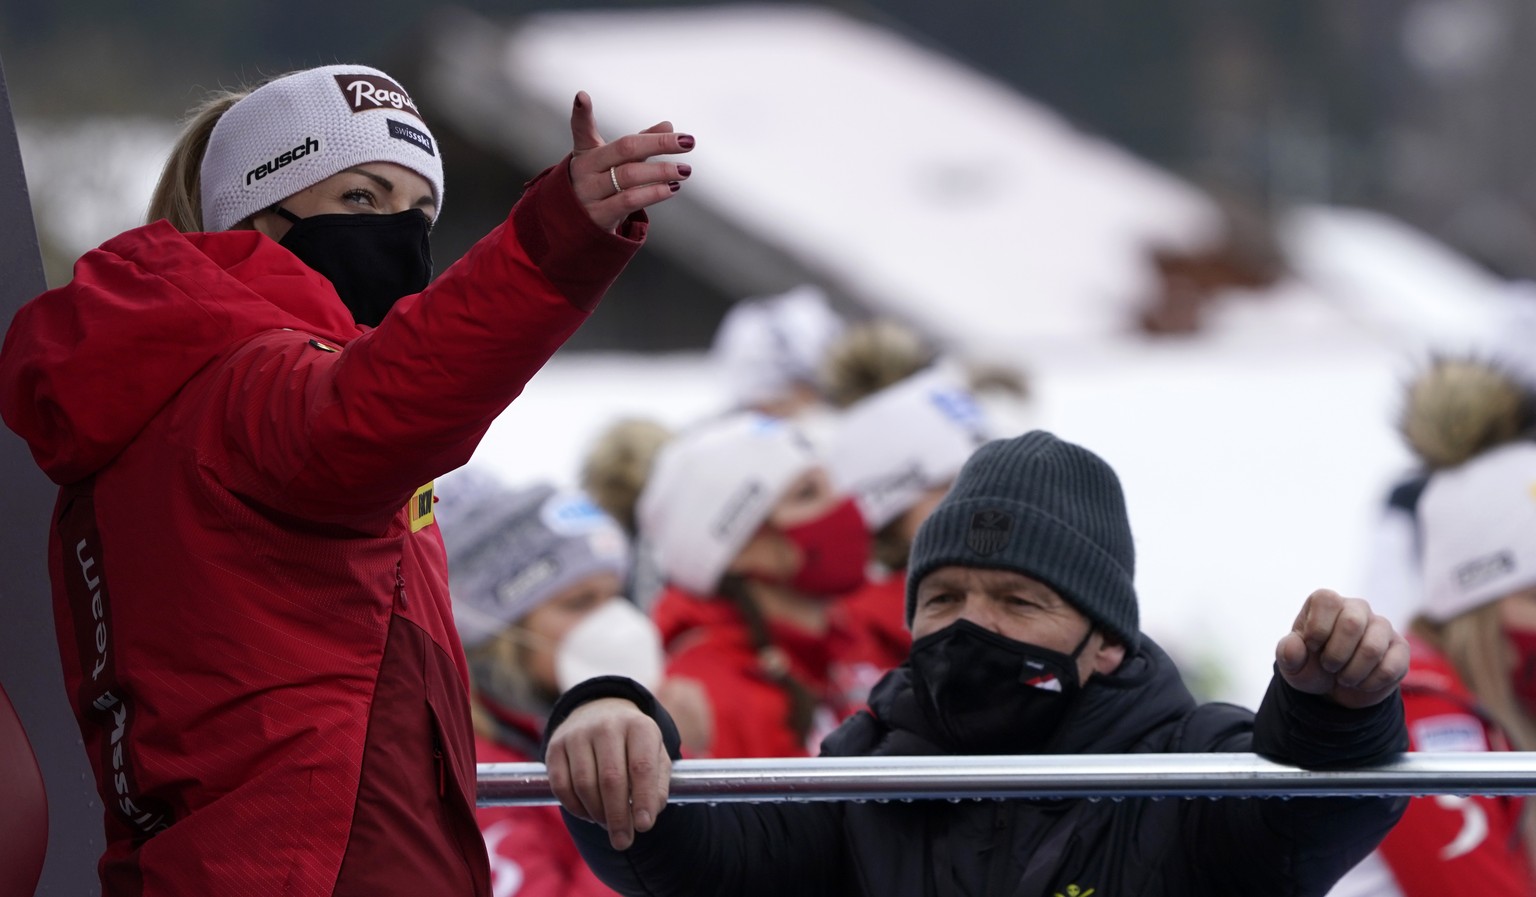 Switzerland&#039;s Lara Gut-Behrami looks at the board as she waits for the end of an alpine ski, women&#039;s World Cup super-G race in Garmisch-Partenkirchen, Germany, Monday, Feb. 1, 2021. (AP Phot ...